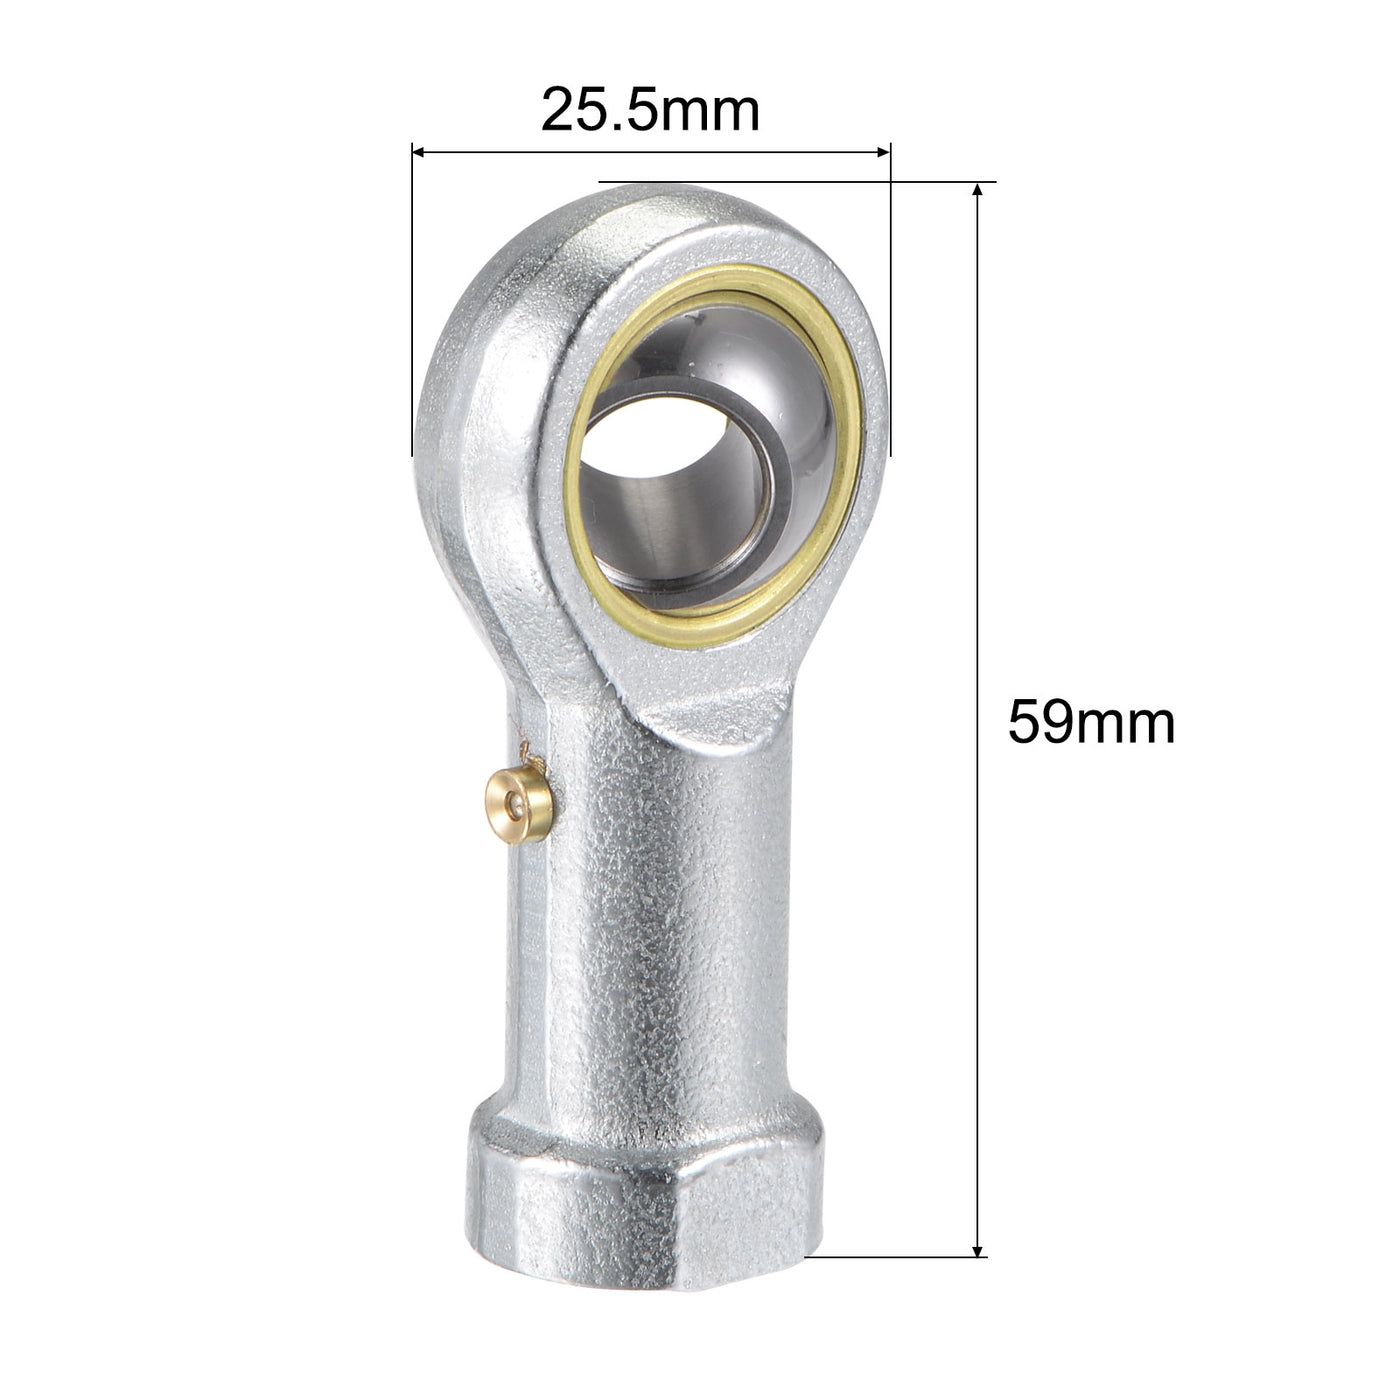 uxcell Uxcell PHS10 Rod End Bearing 10mm Bore Self-lubricated M10x1.5 Left Hand Female Thread